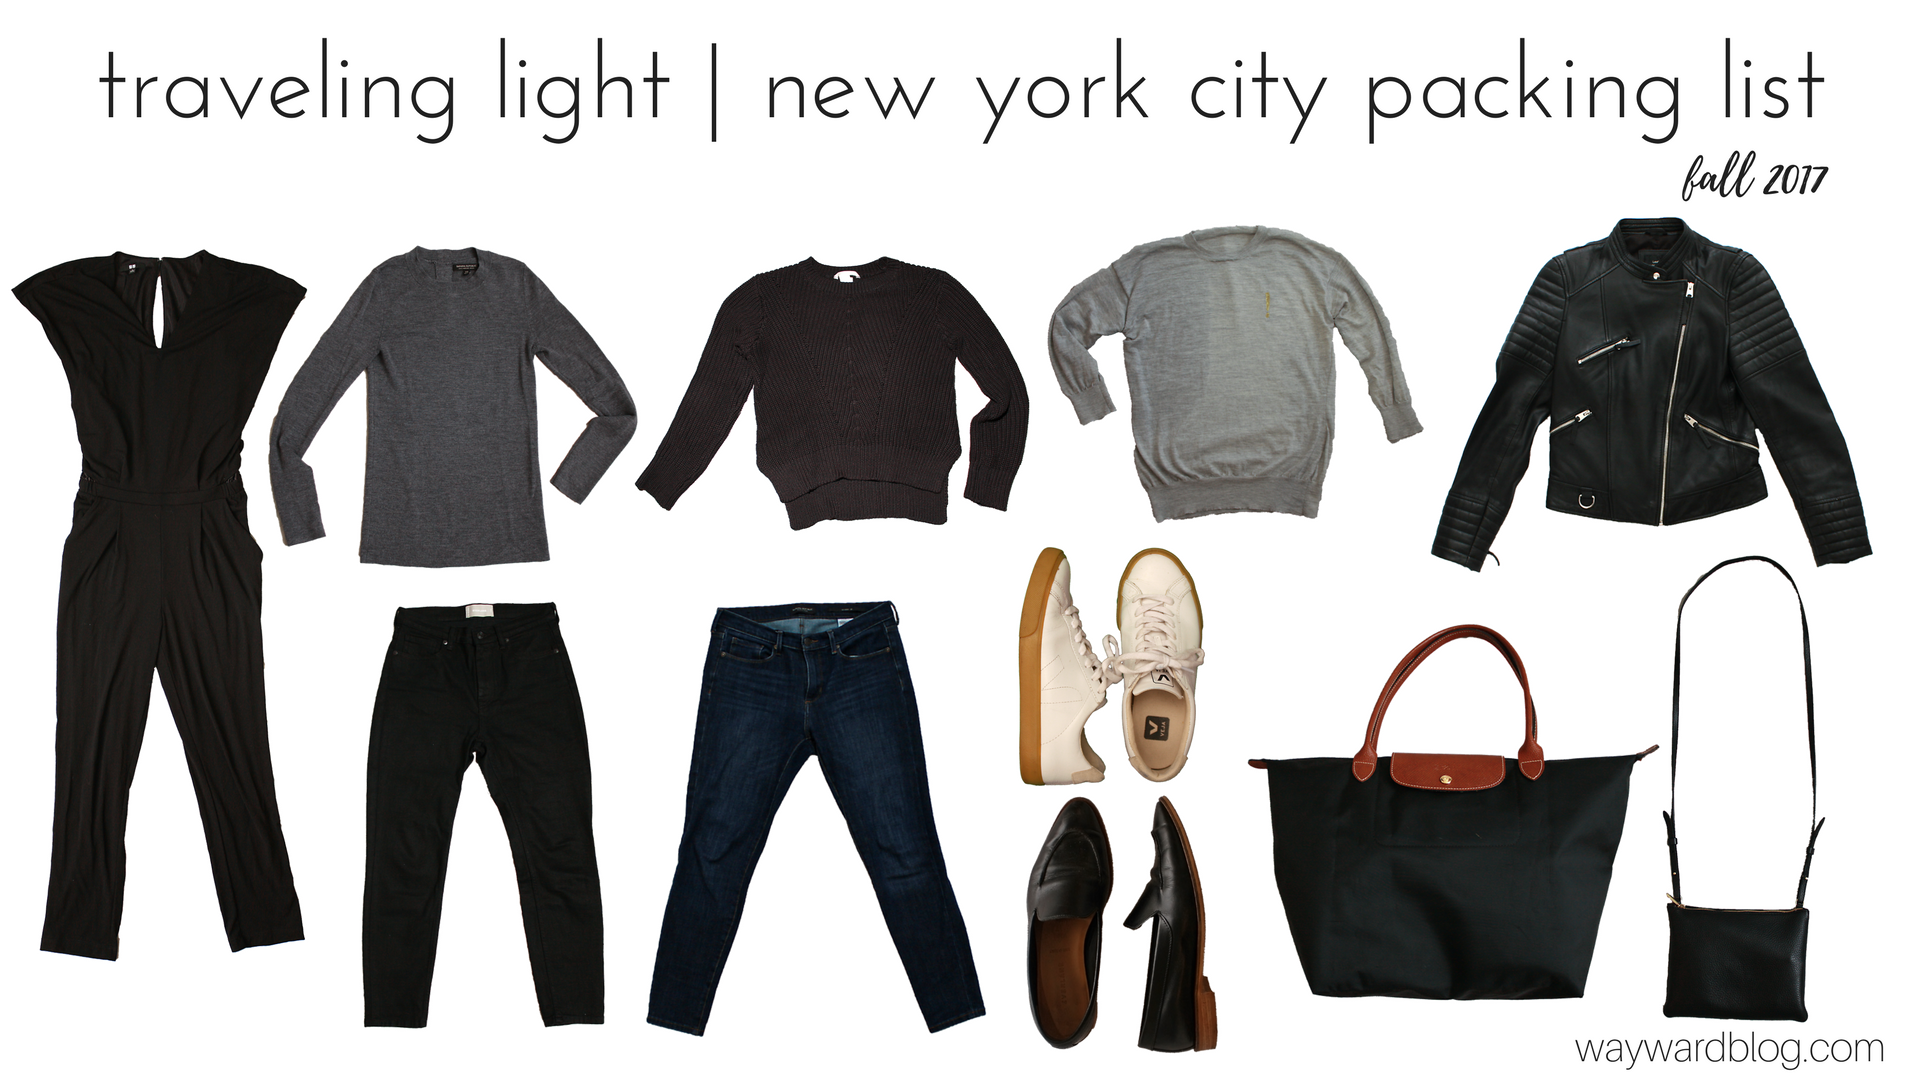 Collage of all items packed for New York City on a white background